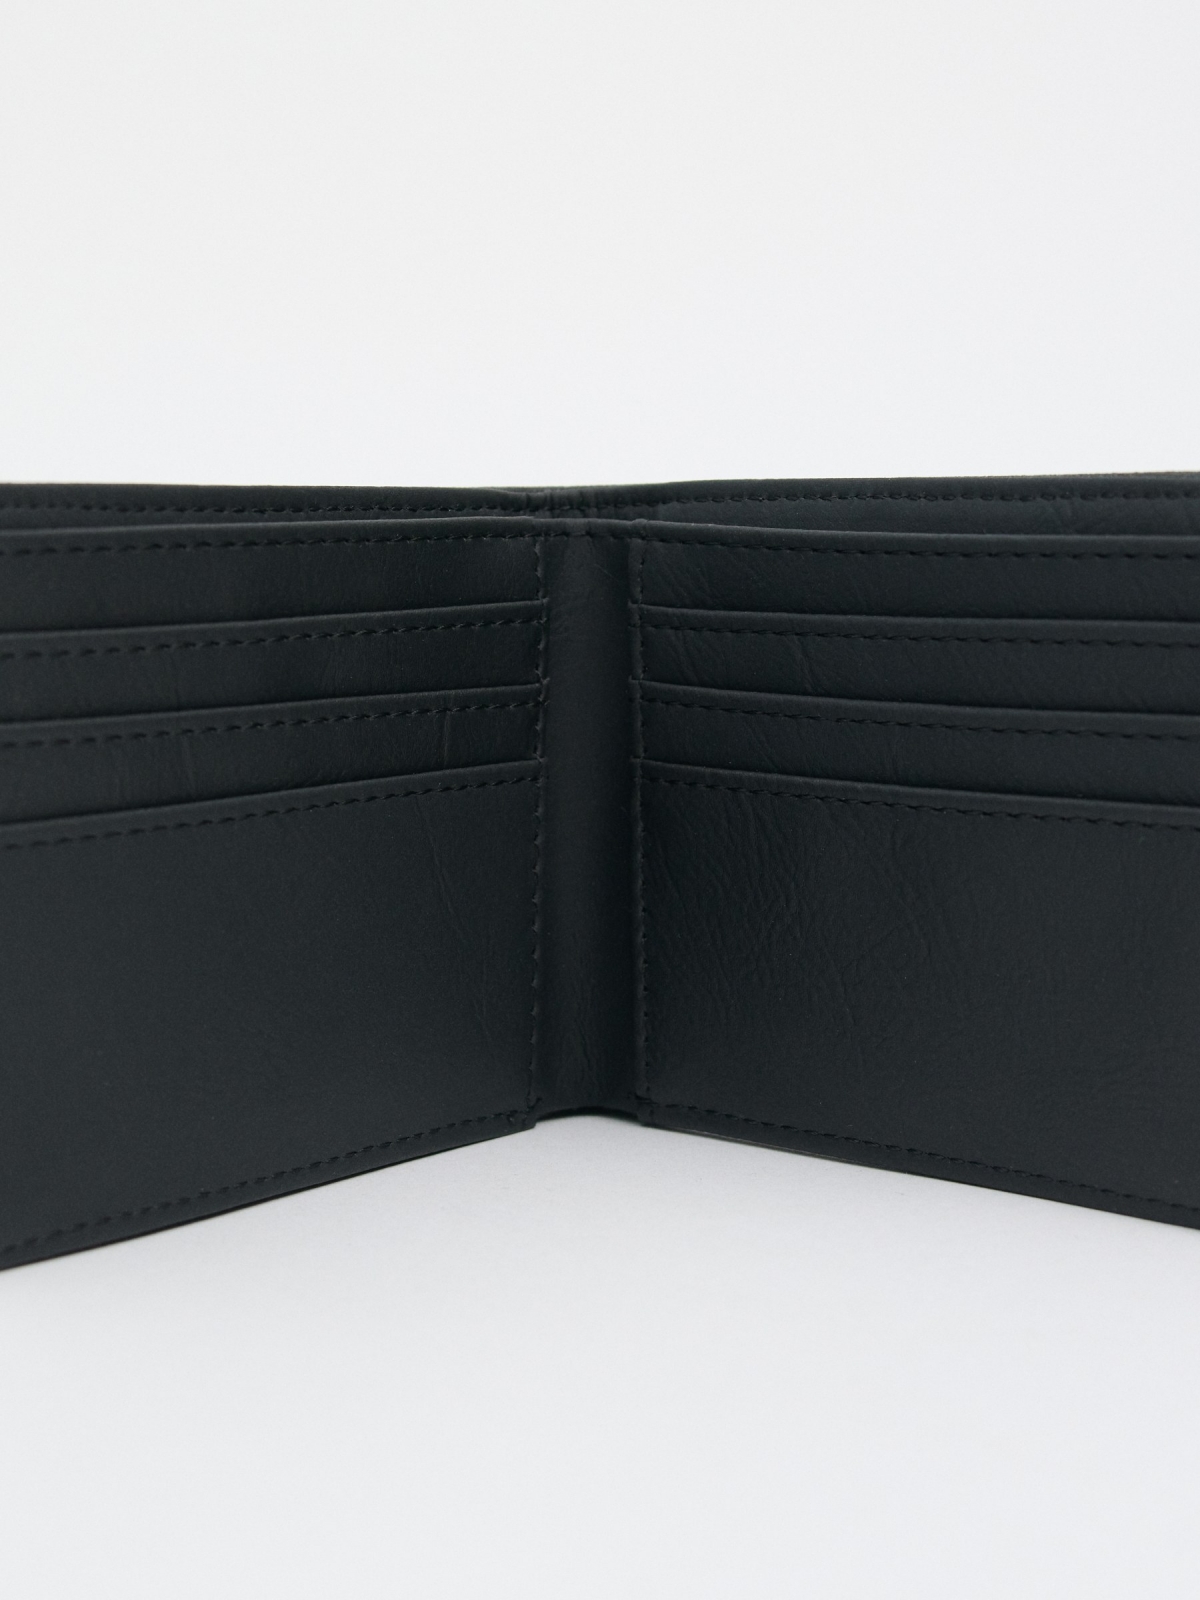 Distressed effect wallet black detail view